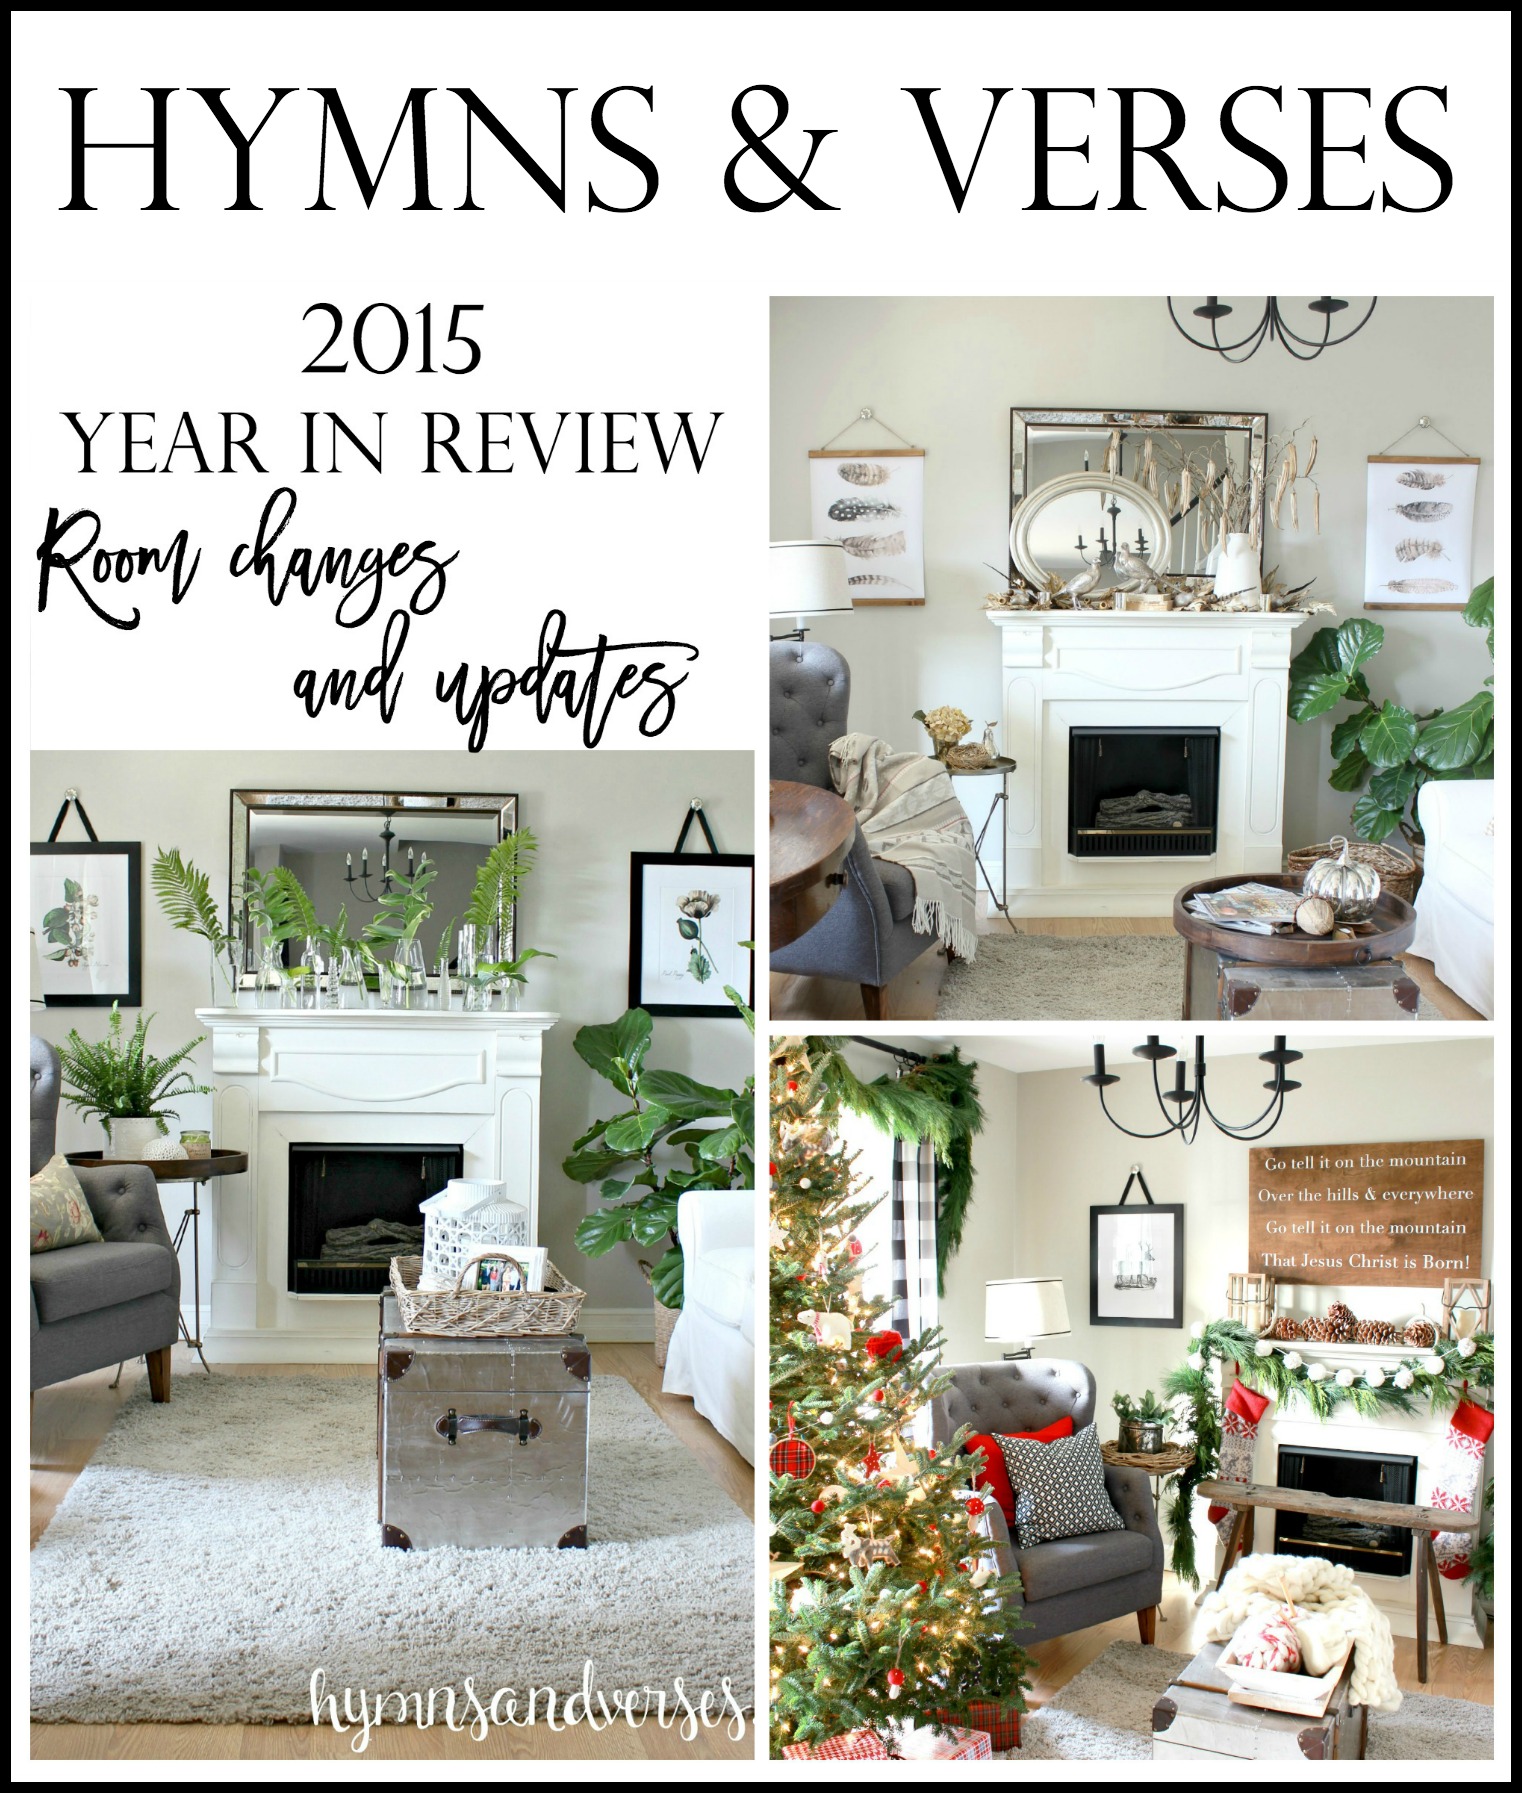 Hymns and Verses 2015 Year in Review